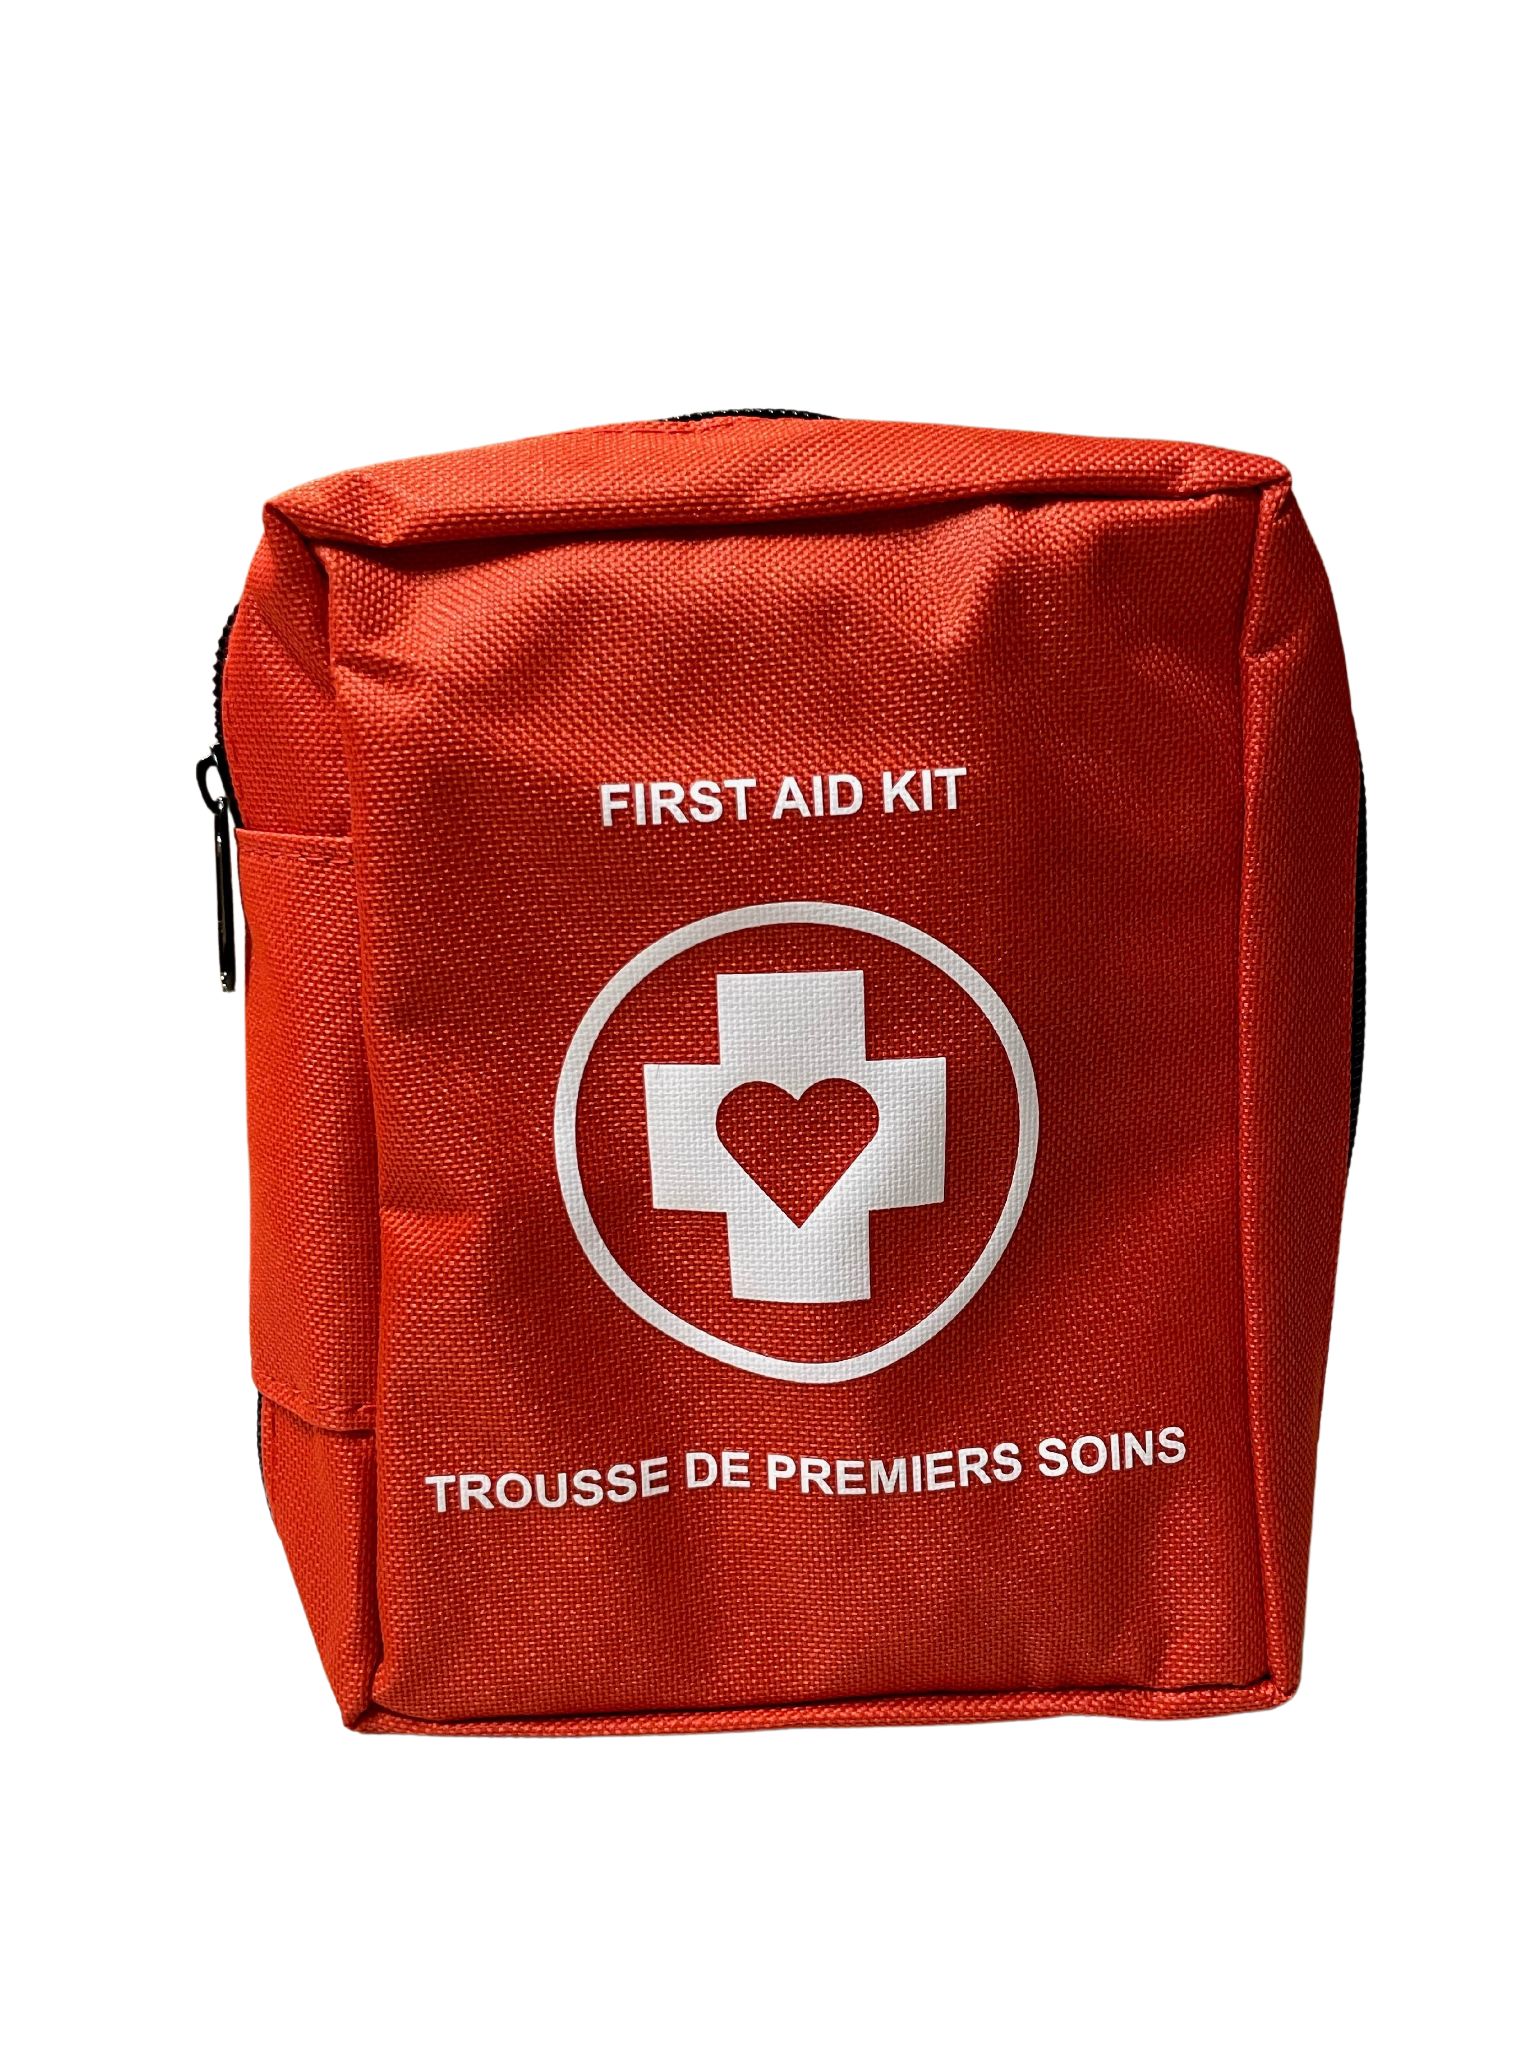 Type 1 Personal First Aid Kit